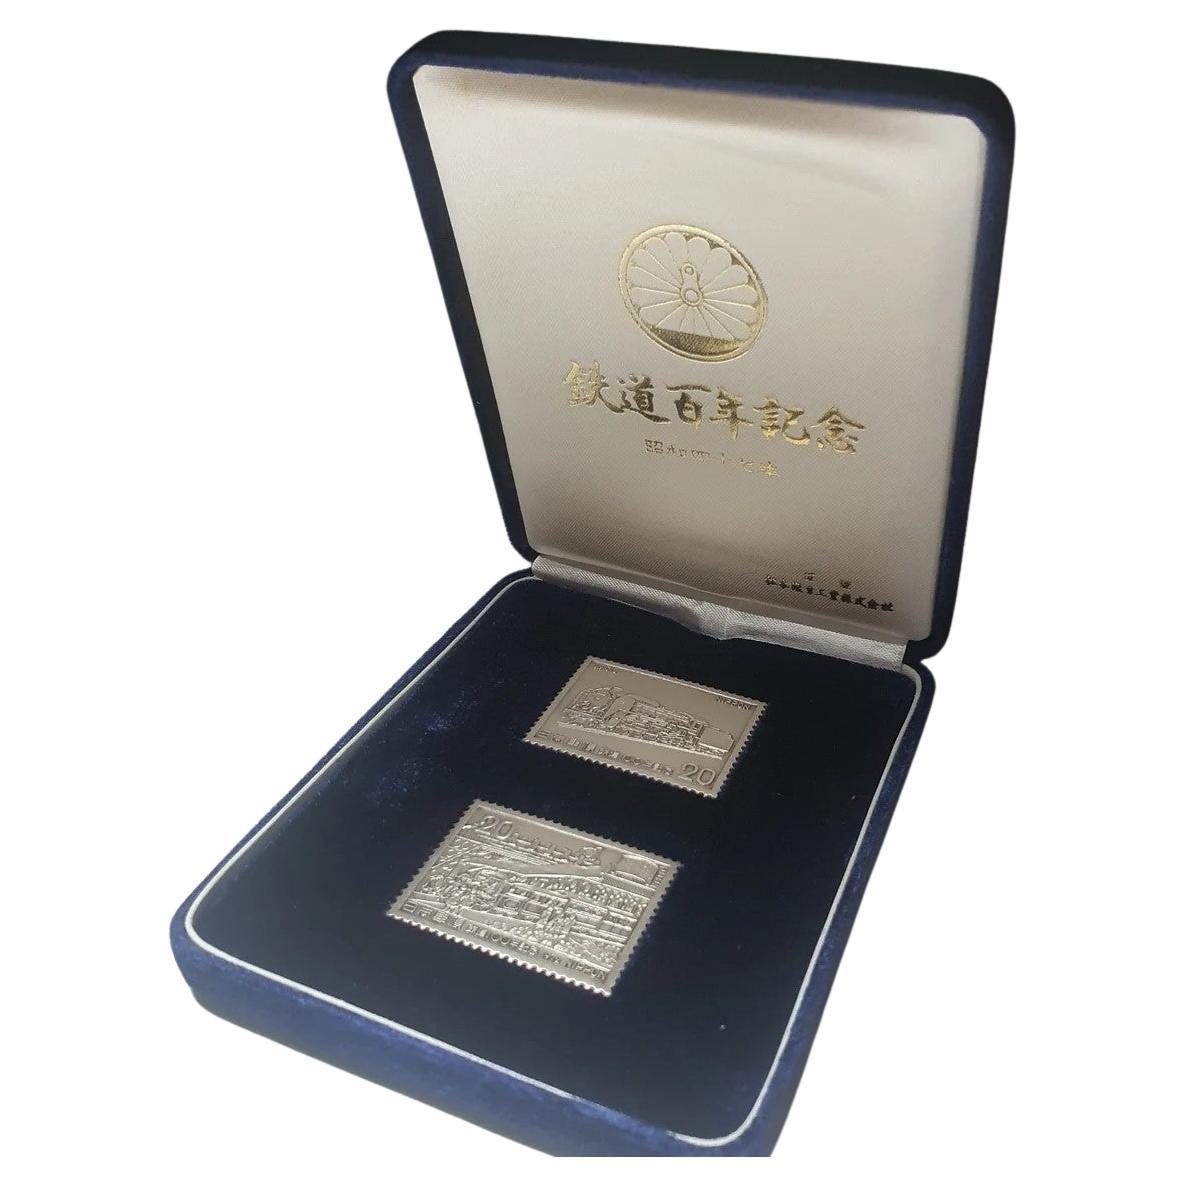 Japanese Fine Silver Stamp Proof Set - 100th Anniversary of the Japan Railway For Sale